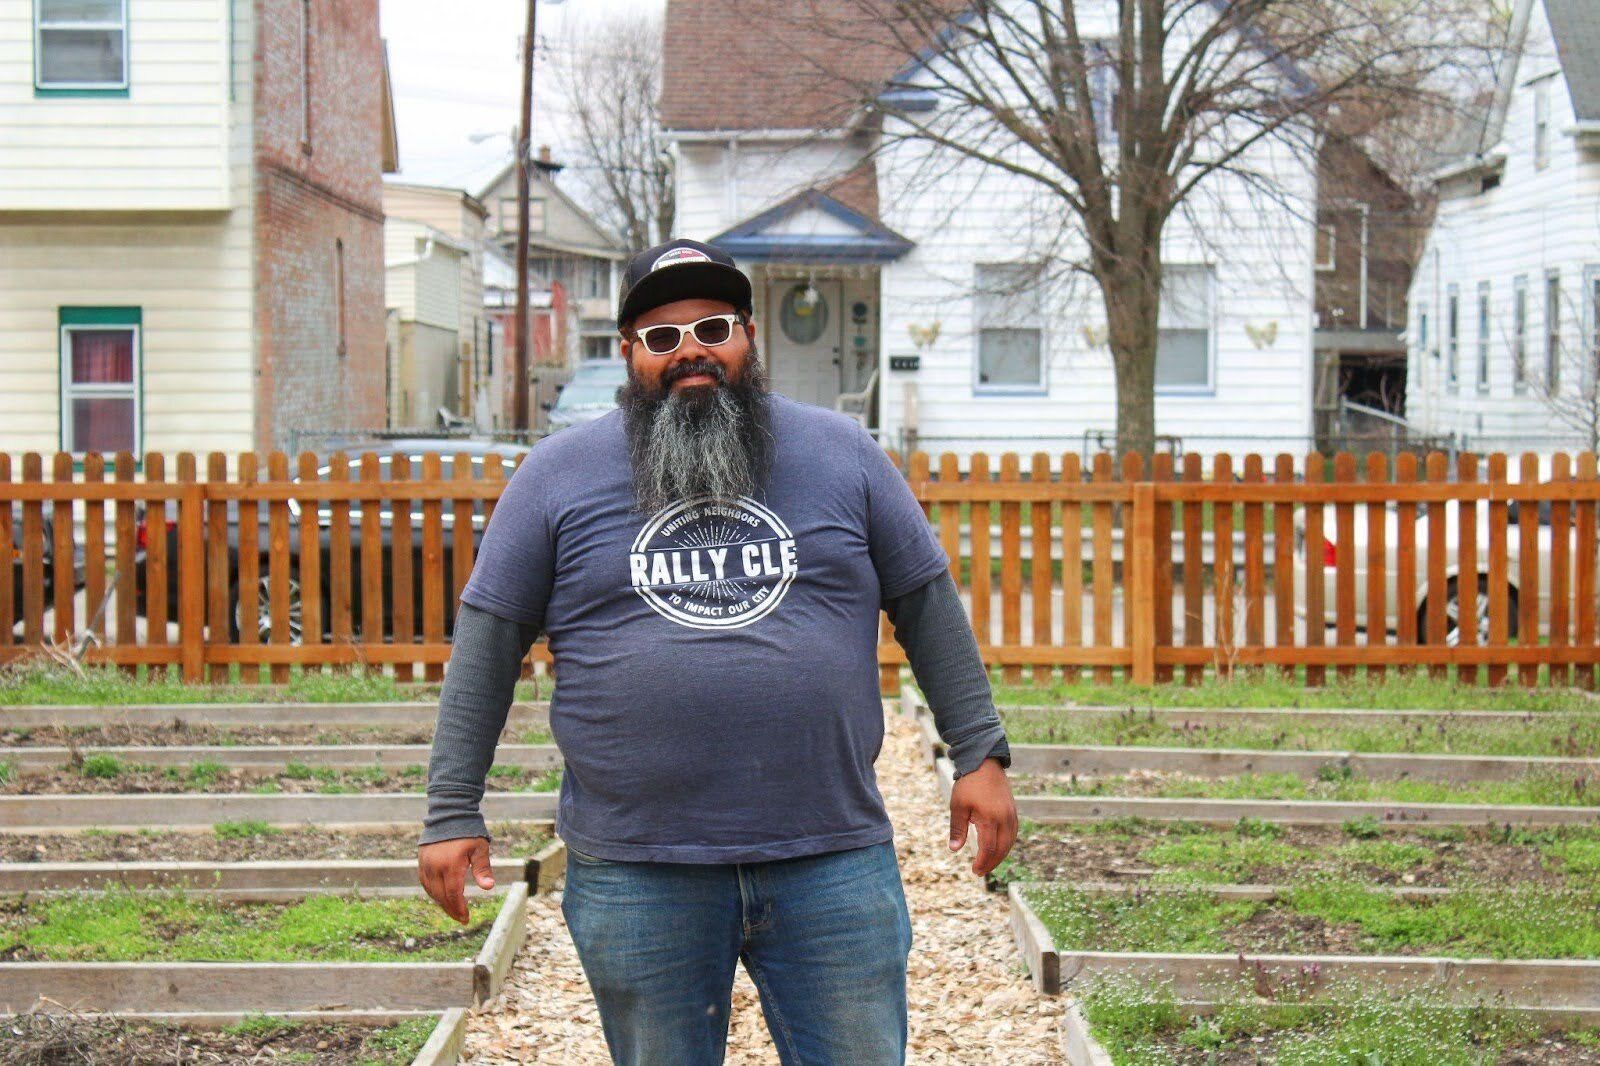 Urban Agriculture Story: Hope Grows in Cleveland, Ohio